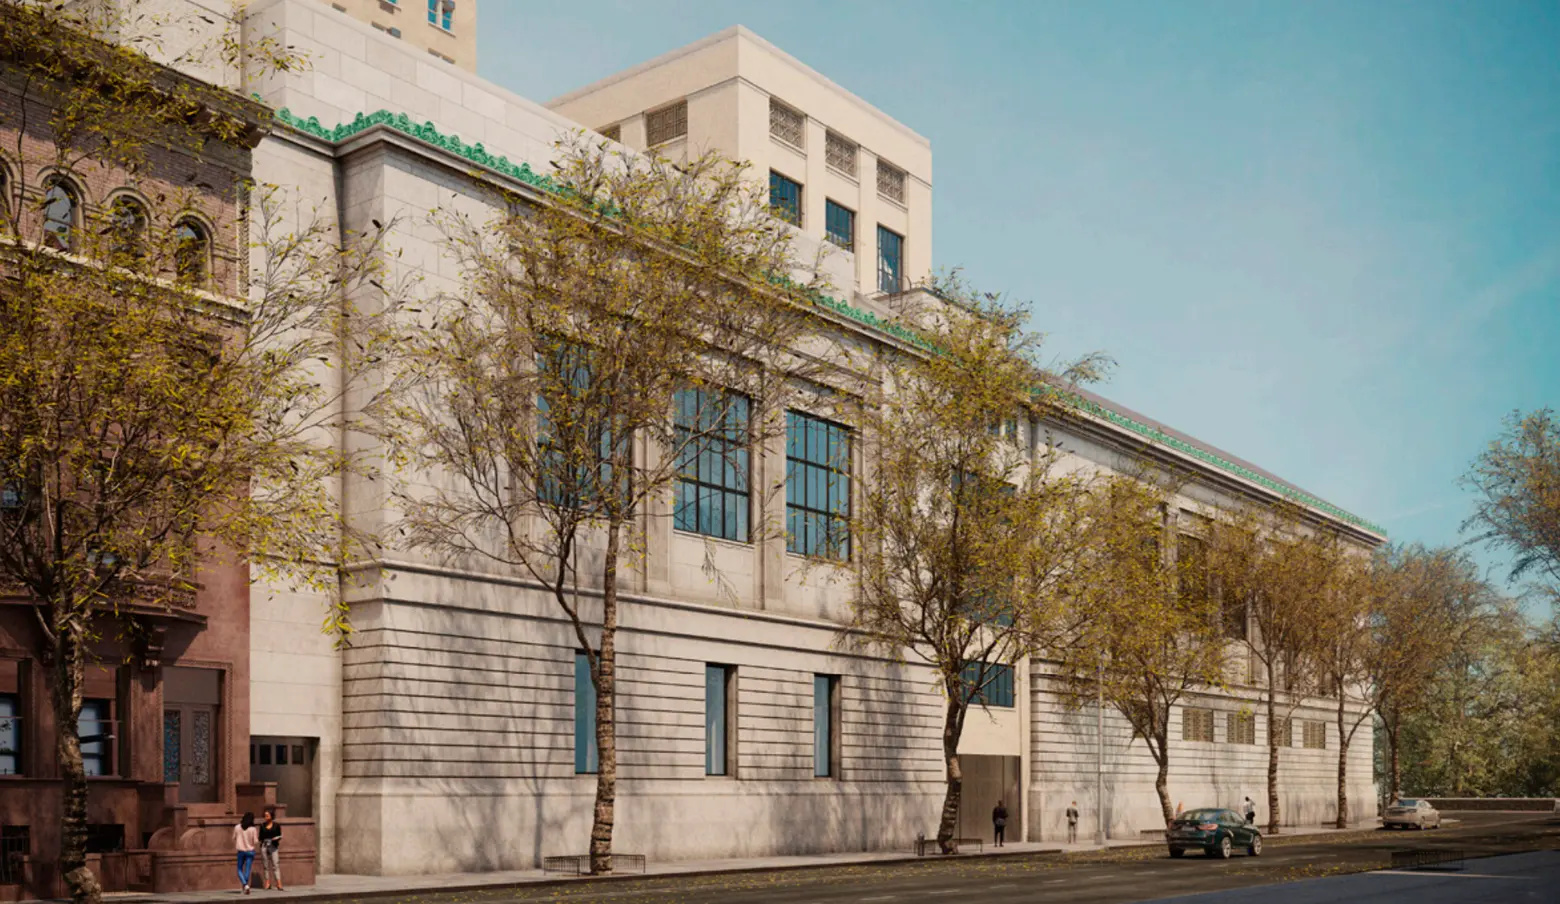 New-York Historical Society expansion includes a home for the American L.G.B.T.Q.+ Museum